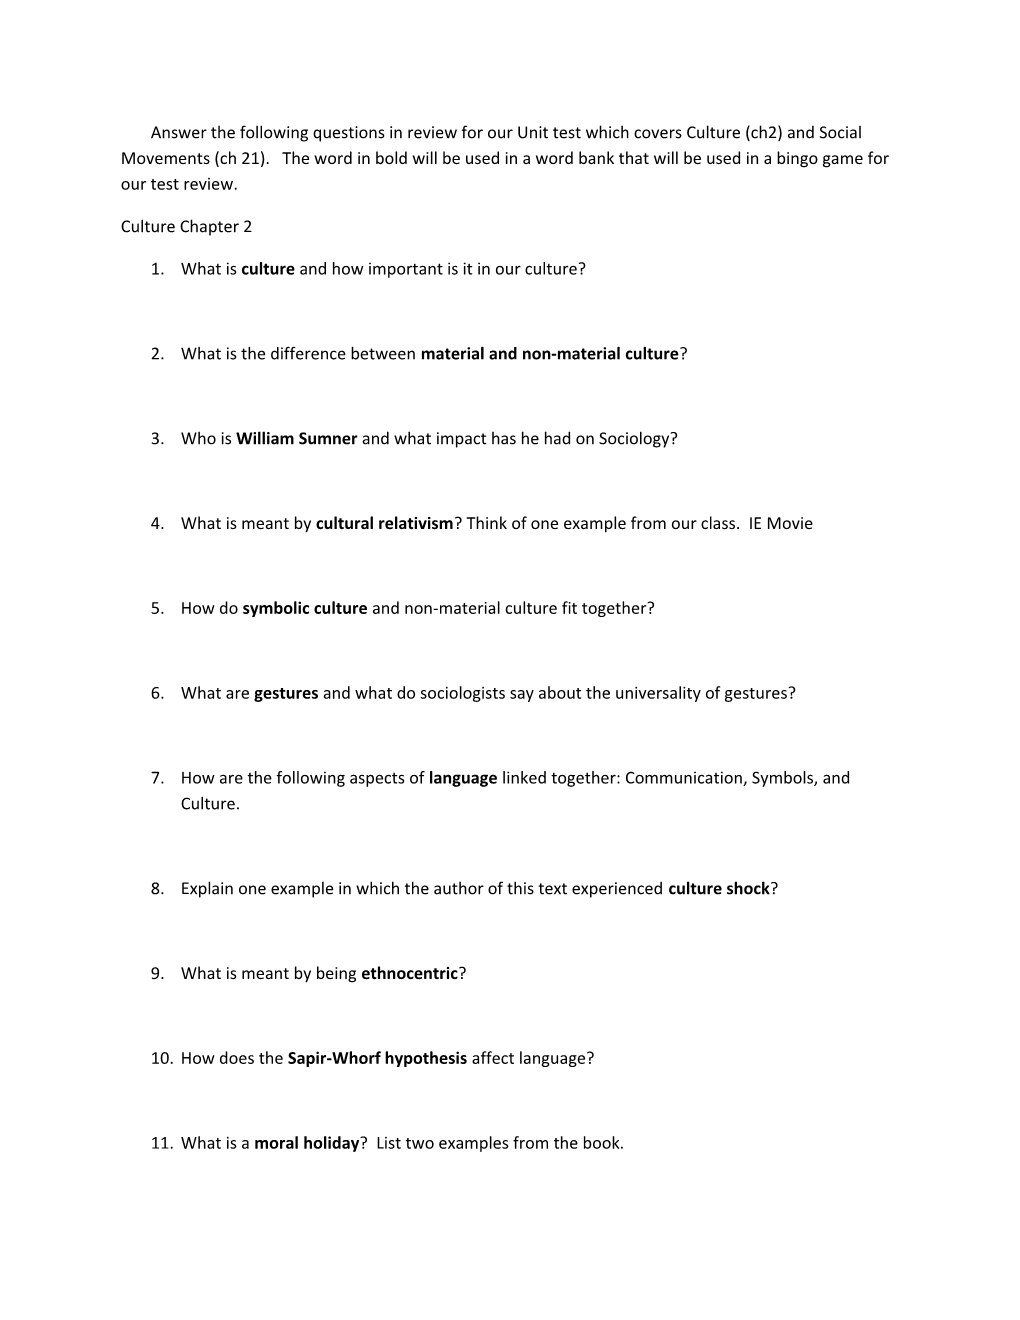 Answer the Following Questions in Review for Our Unit Test Which Covers Culture (Ch2) And